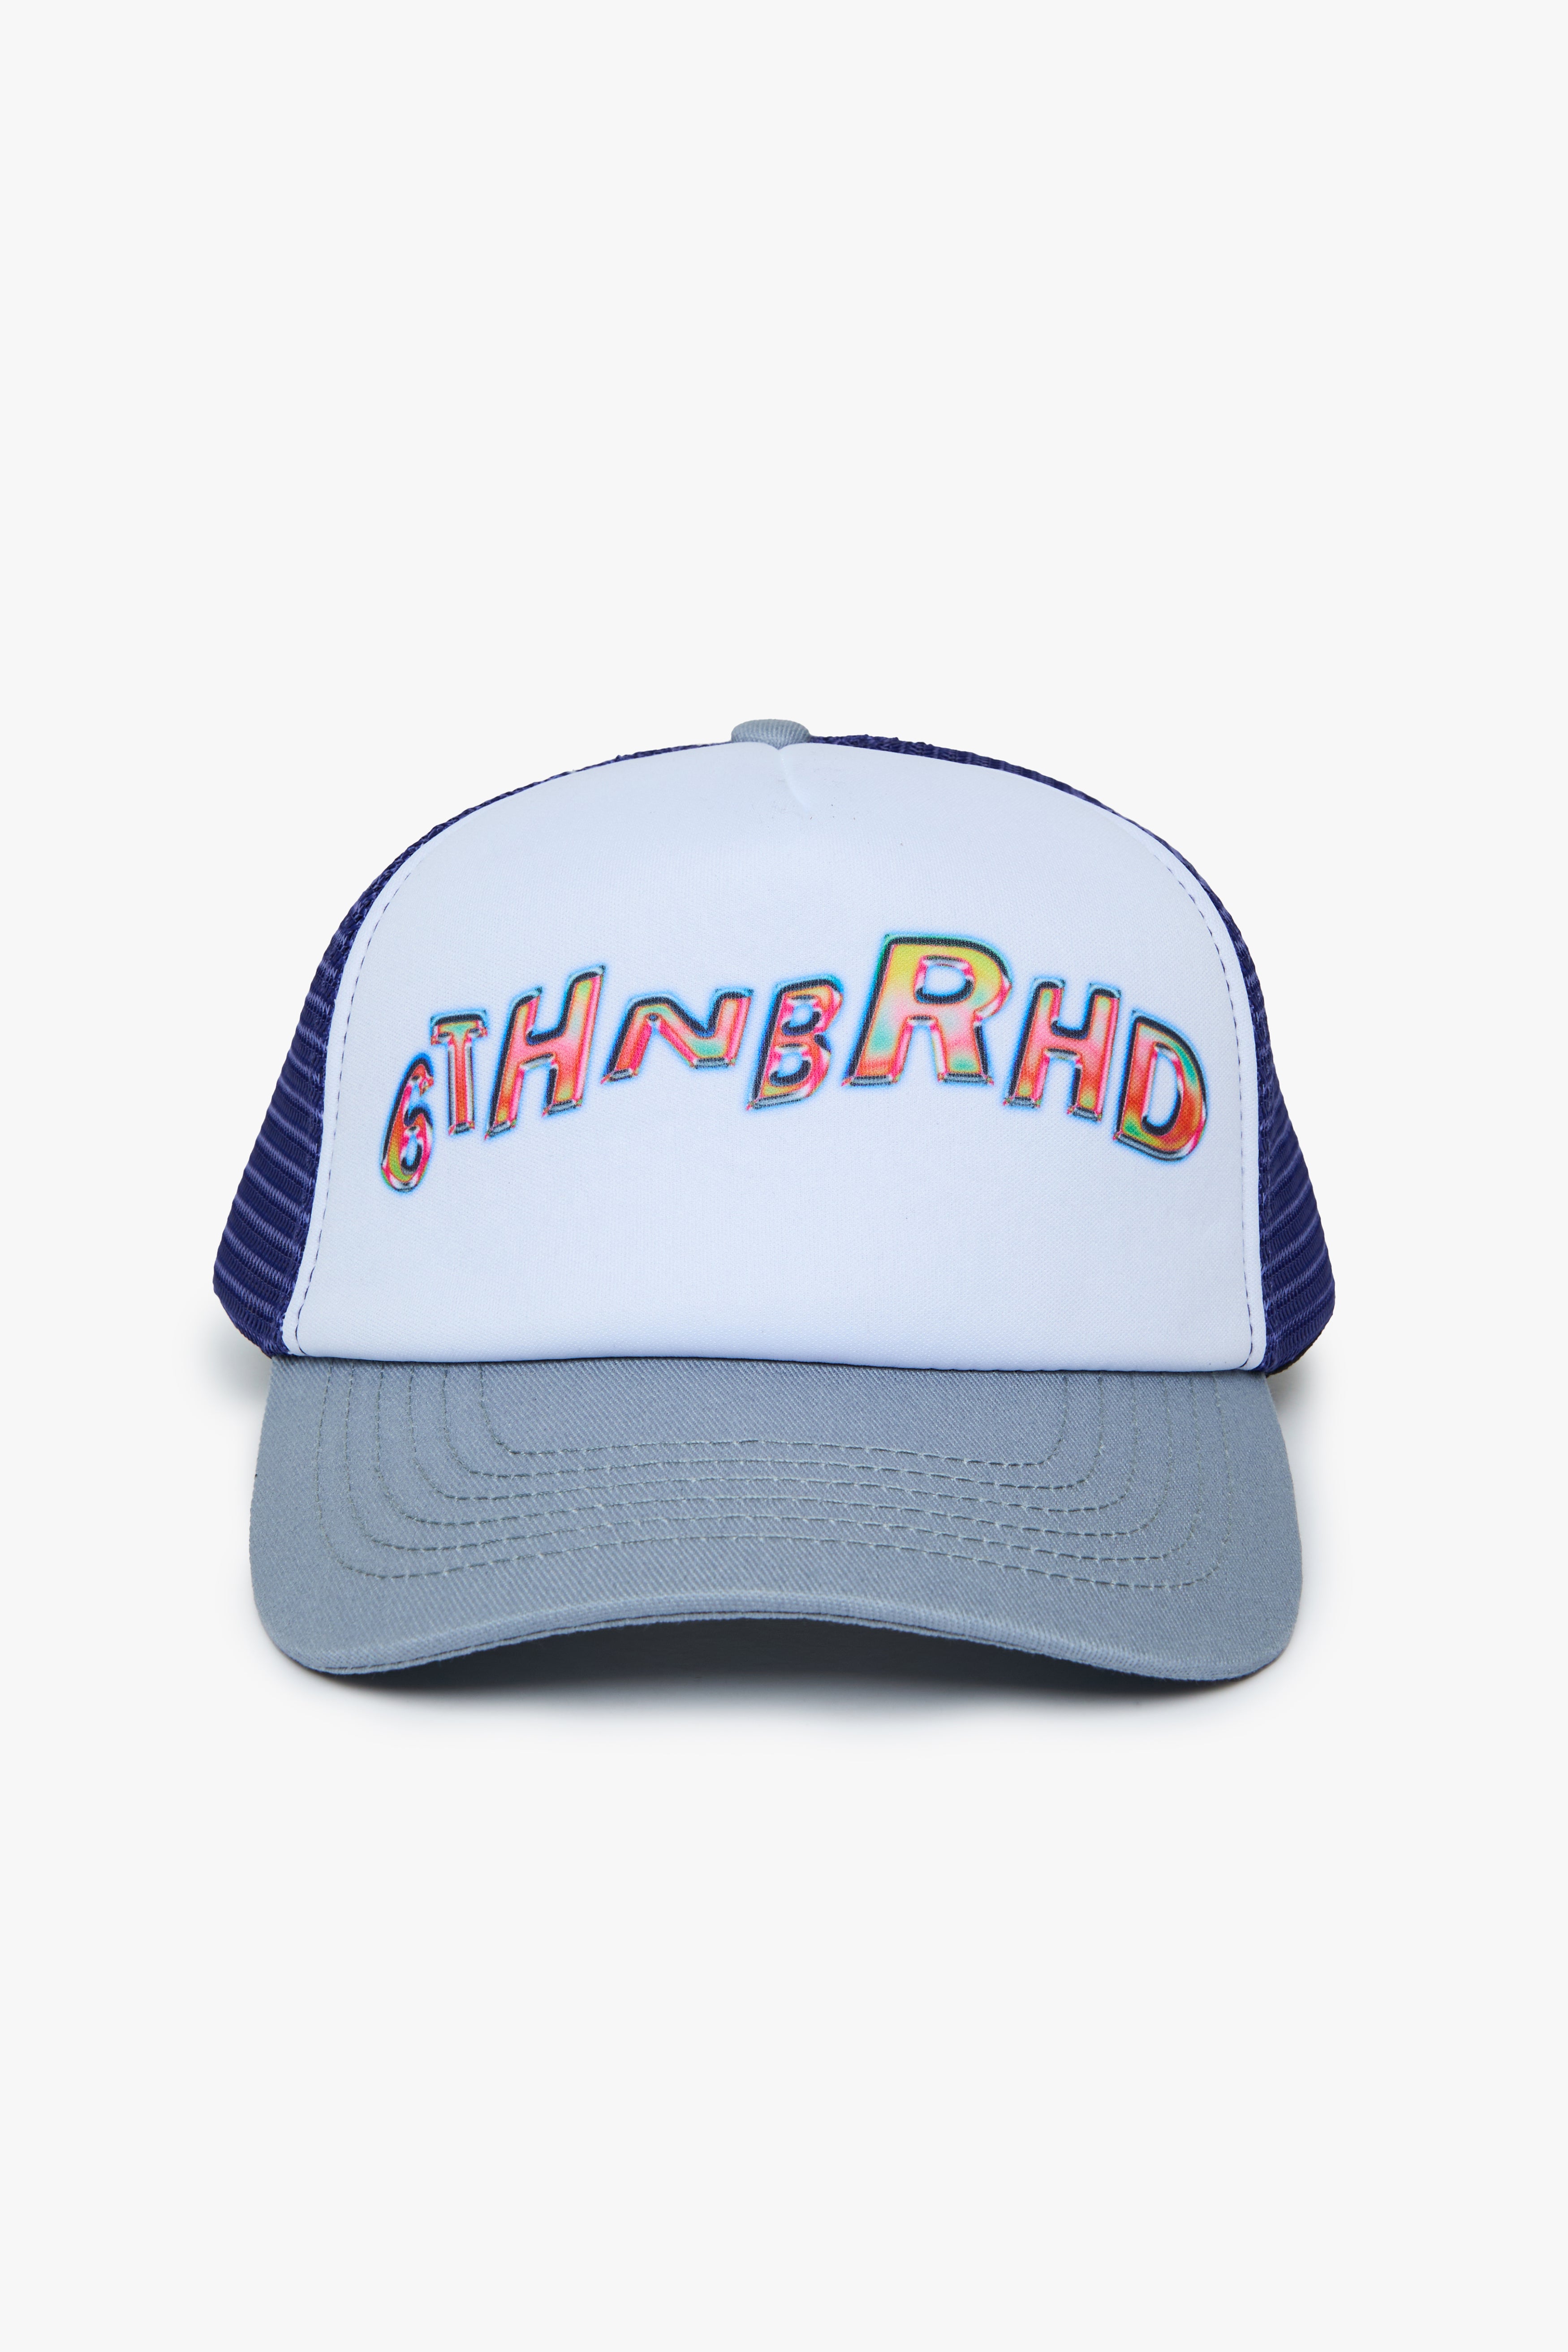 6thNBRHD HAT "OUTERLIMITS" -GRY/NVY